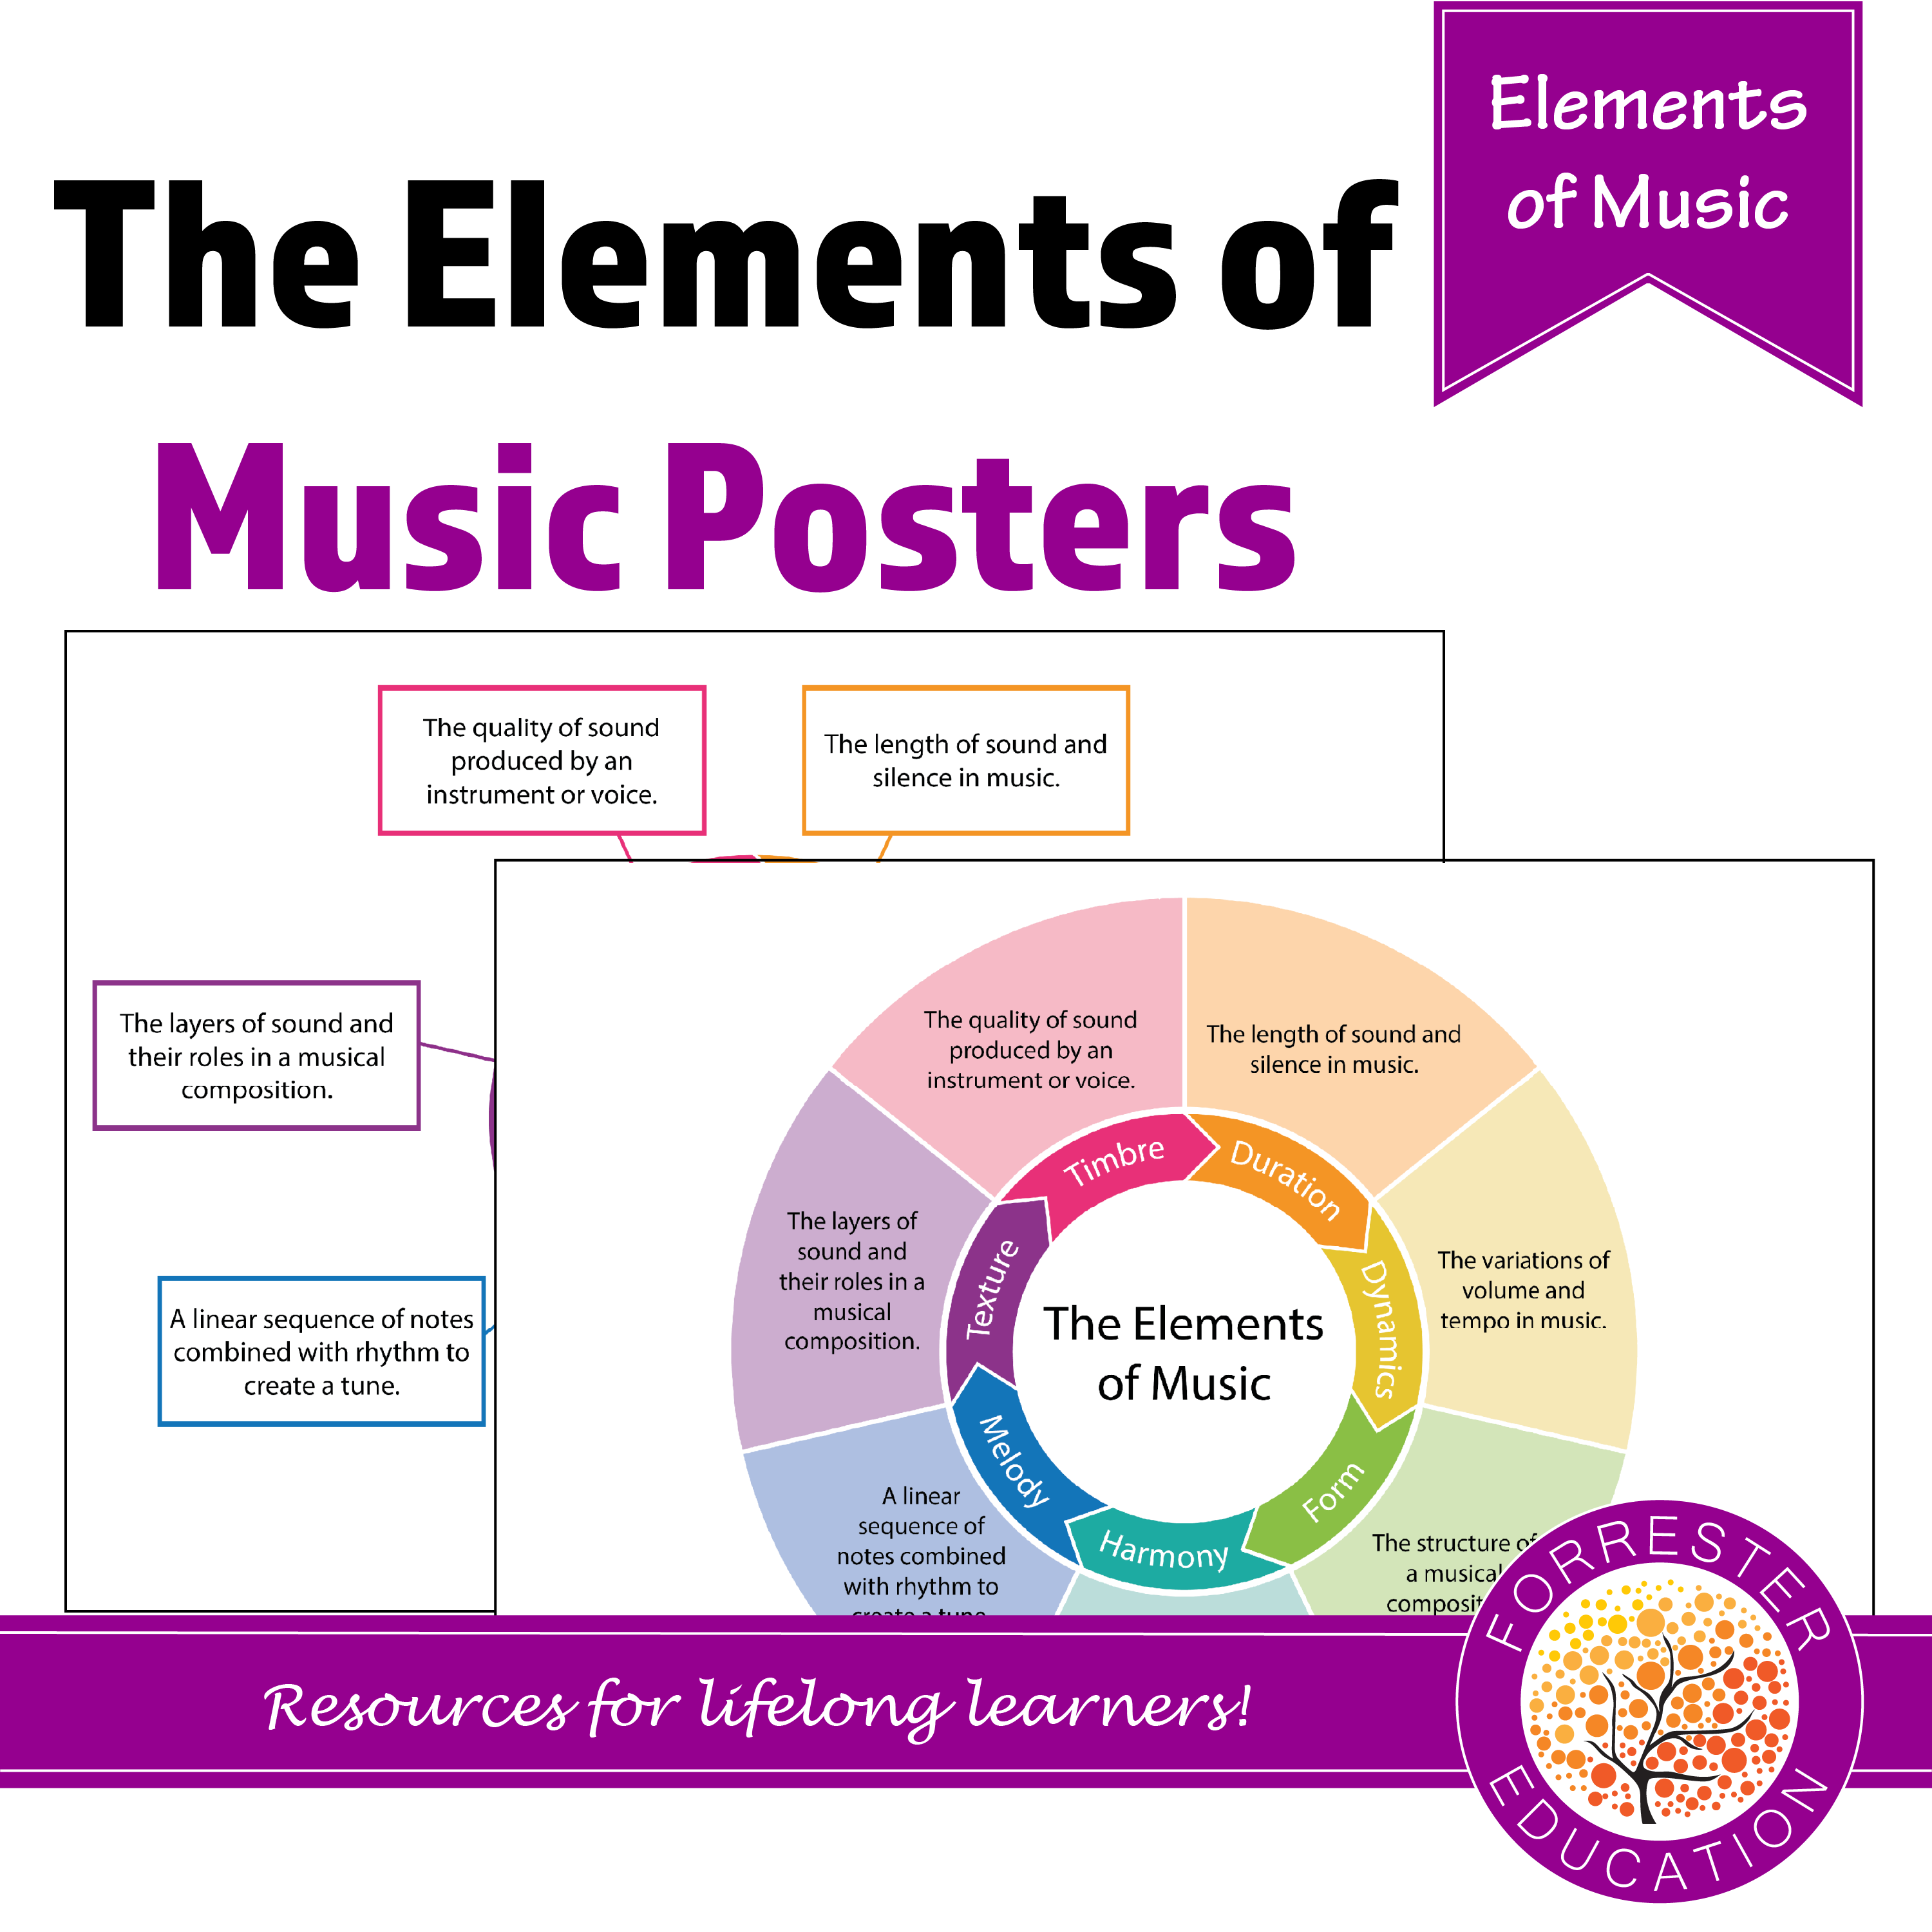 The Elements of Music - Posters